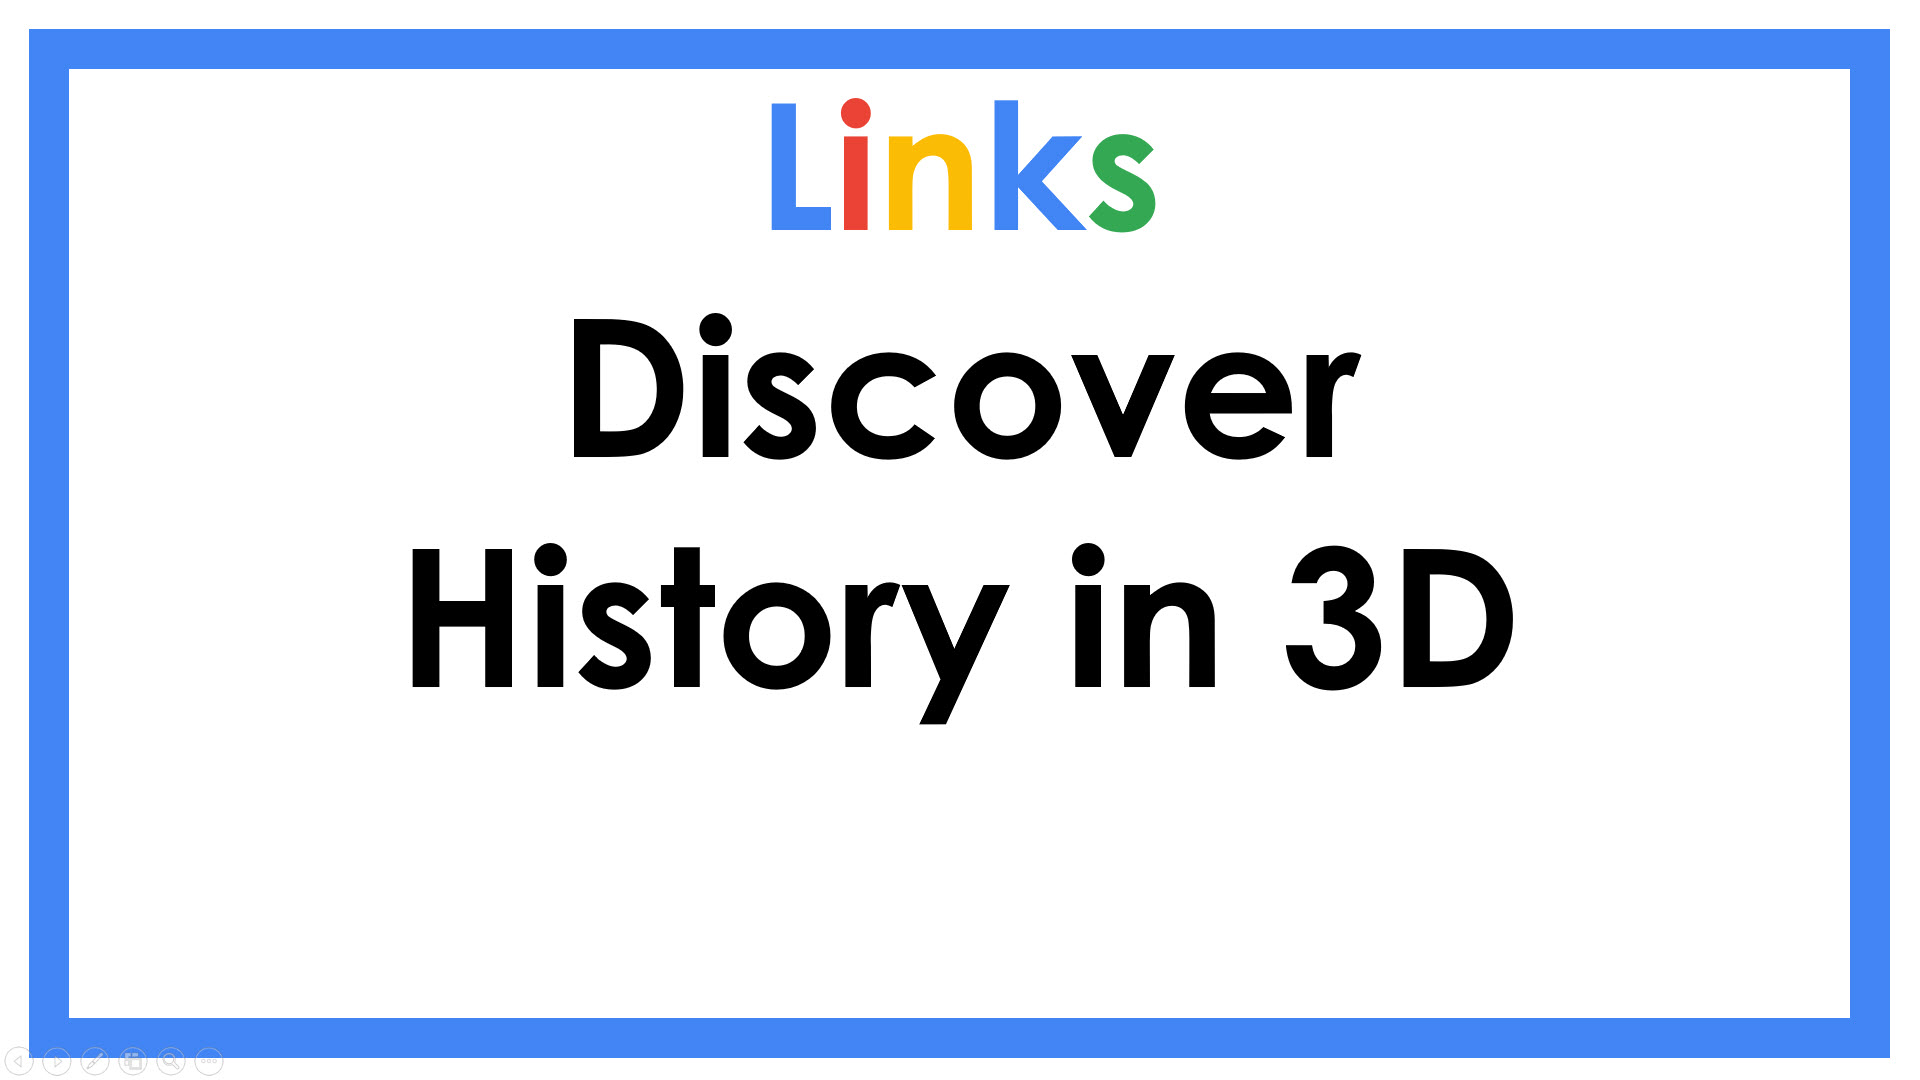 Links Discover History in 3D